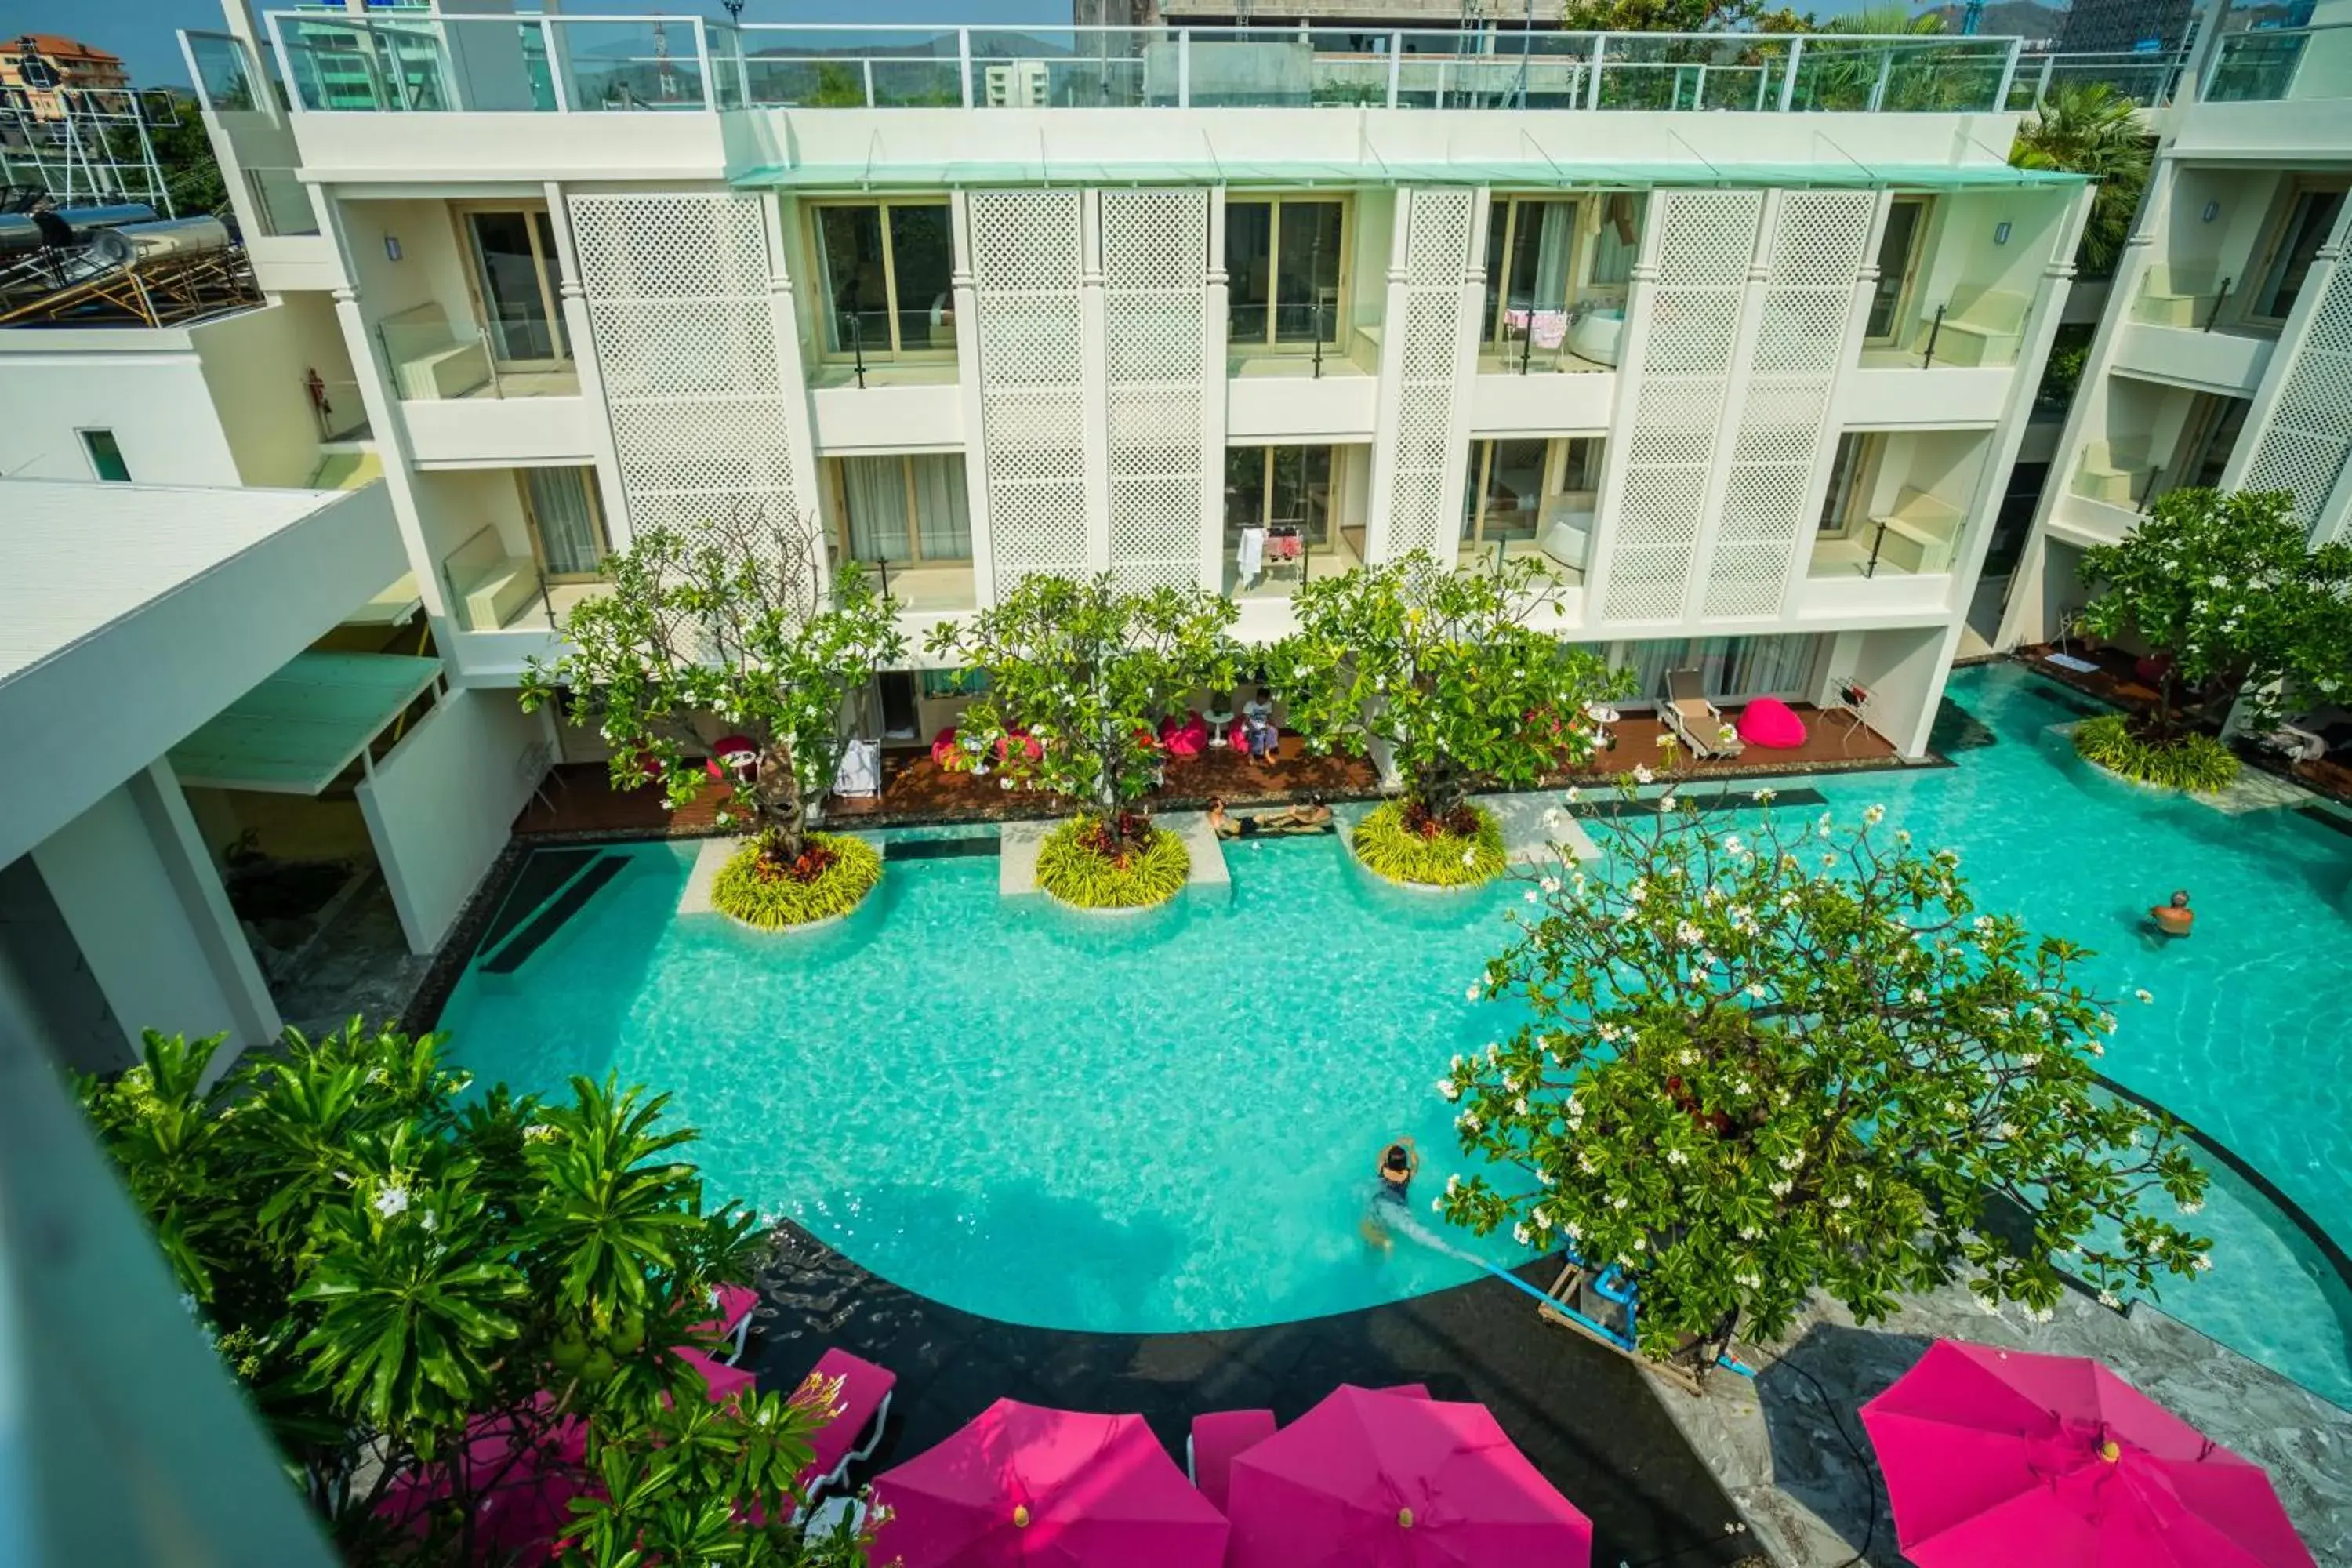 Property building, Pool View in The Sea Cret Hua Hin Hotel